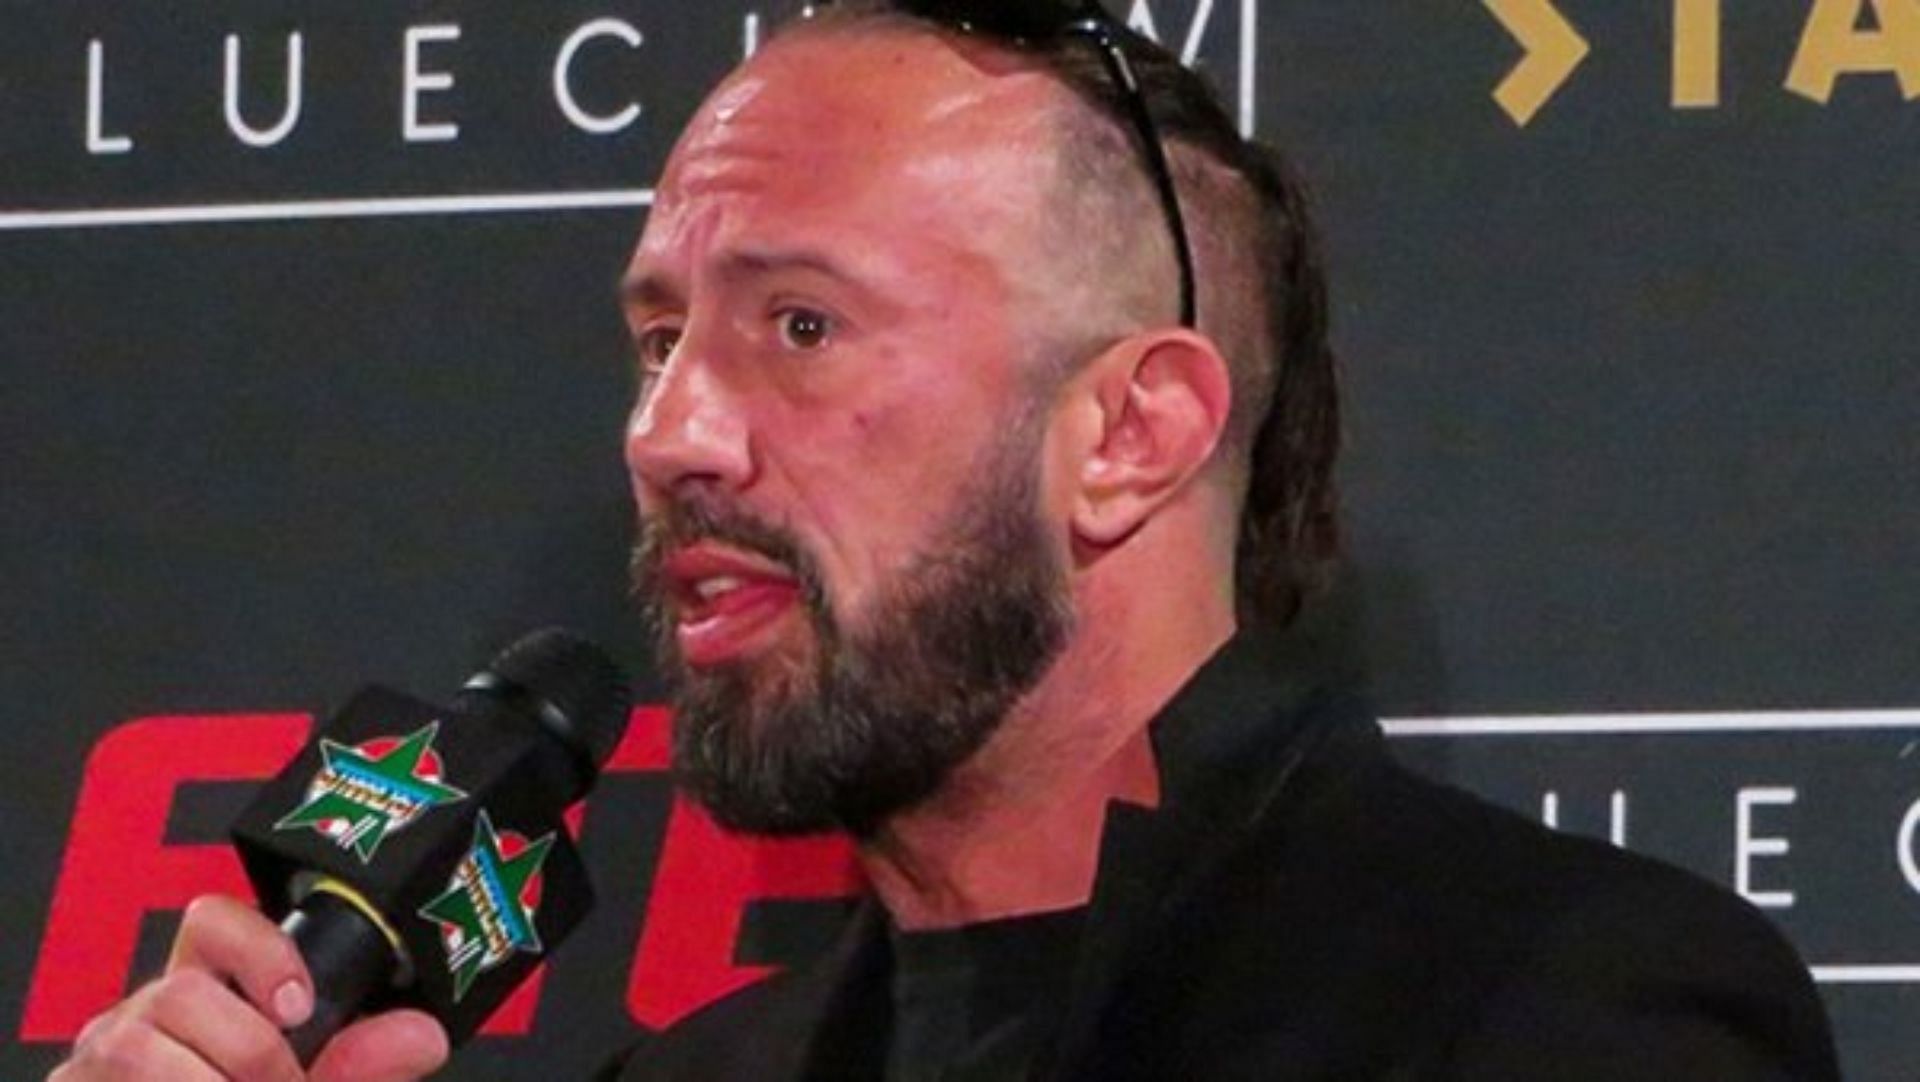 Sean Waltman told WWE he was ready to enter the 2022 Royal Rumble.